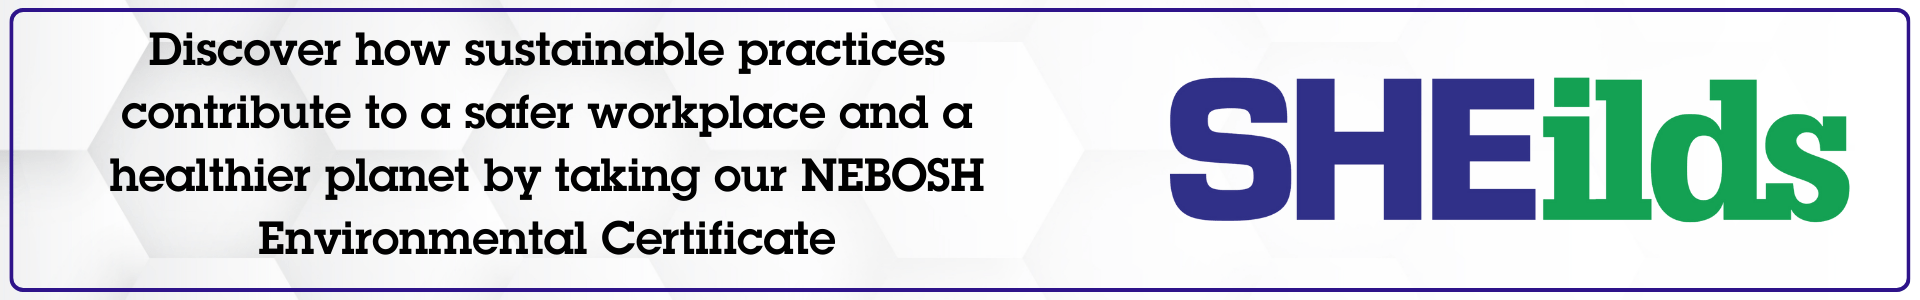 Learn how to integrate sustainability practices to create a safer workplace with our NEBOSH Environmental Certificate.